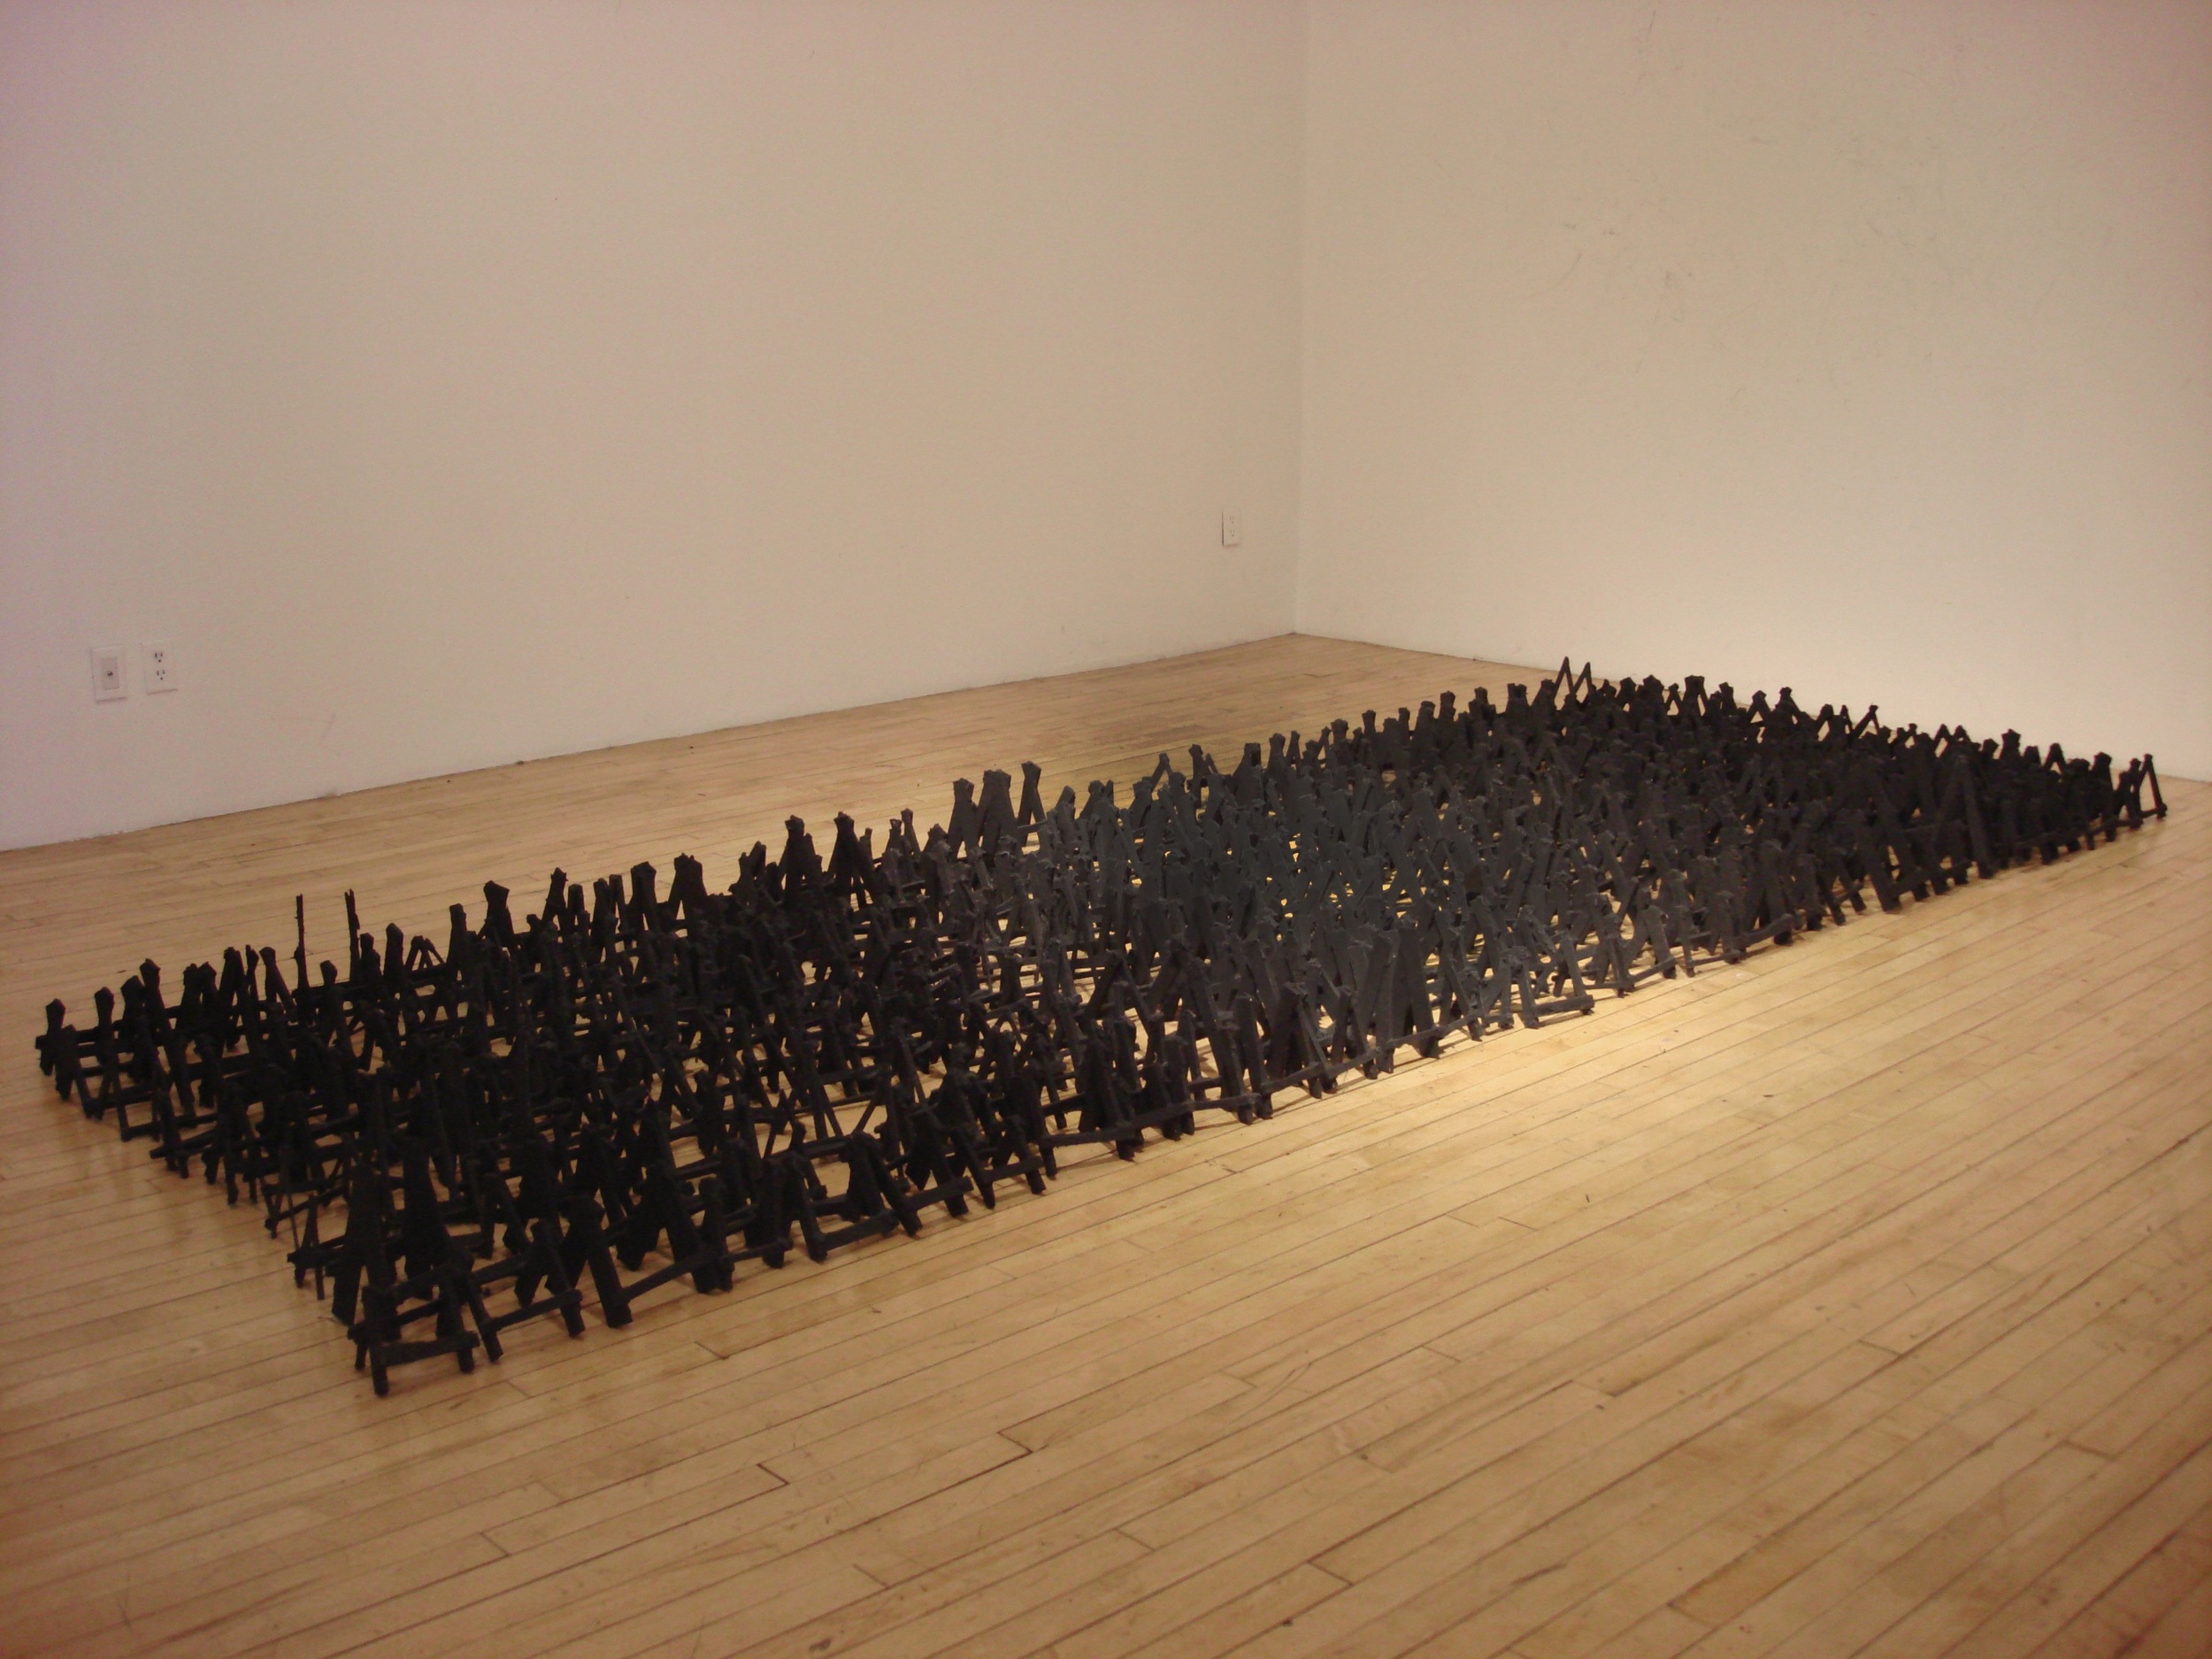 black-stands-latex-paint-on-wood-2010_8024249132_o.jpg